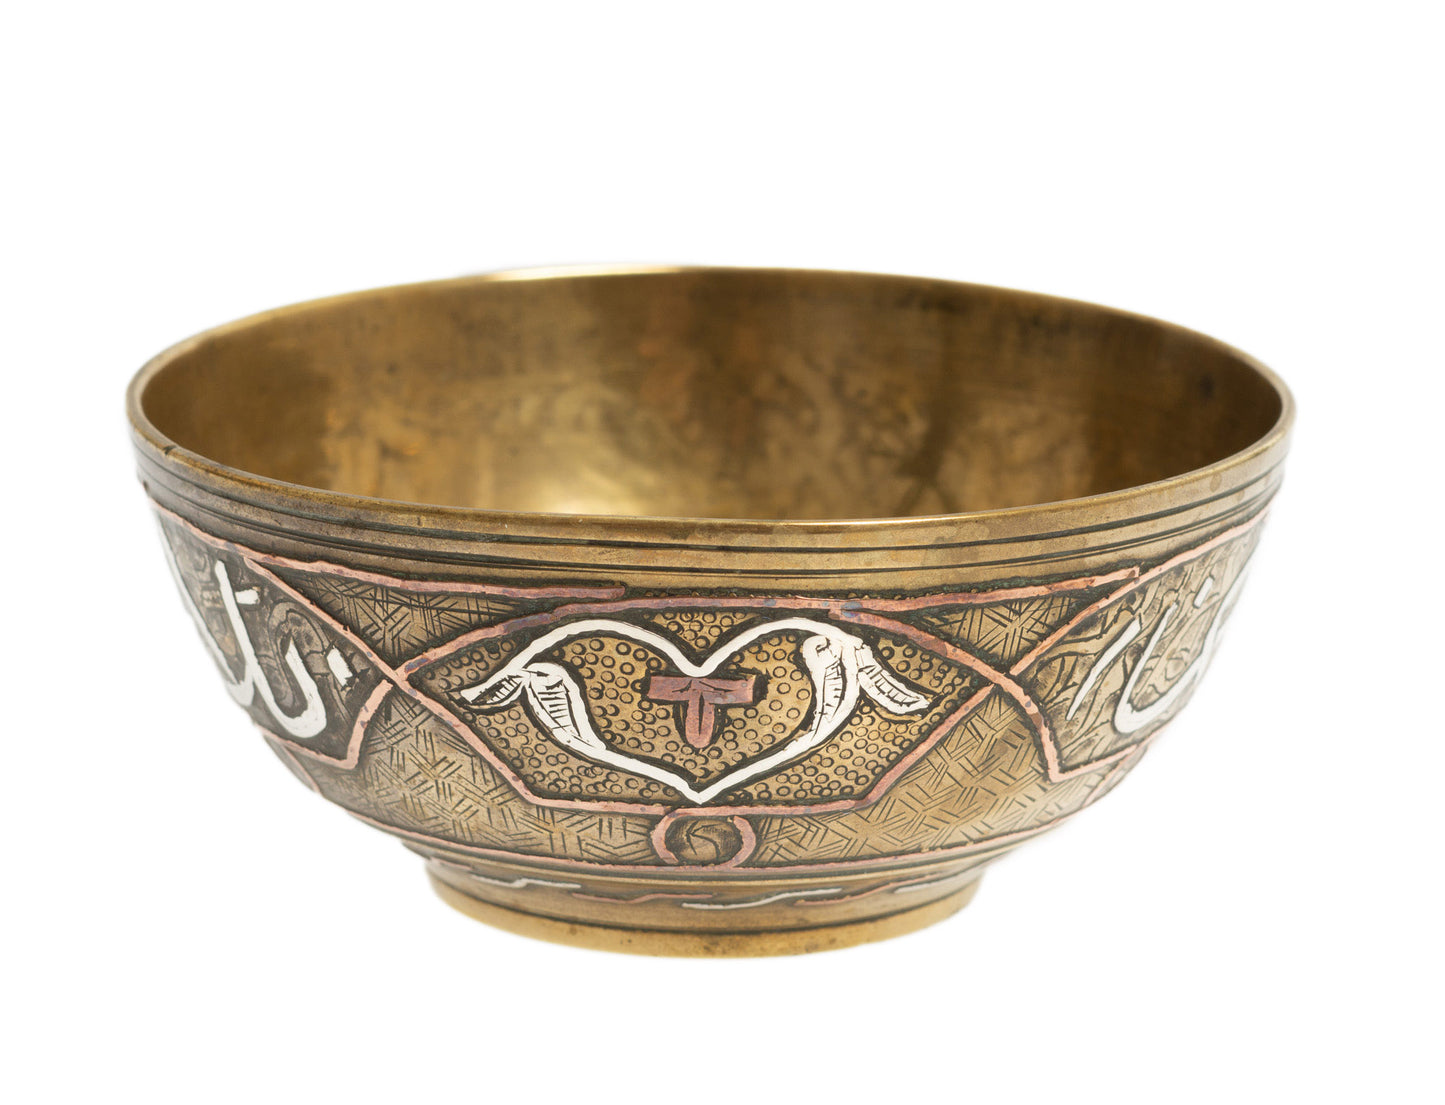 Antique Damascus Brass, Silver & Copper Inlaid Bowl with Star of Sulayman (Code 2715)